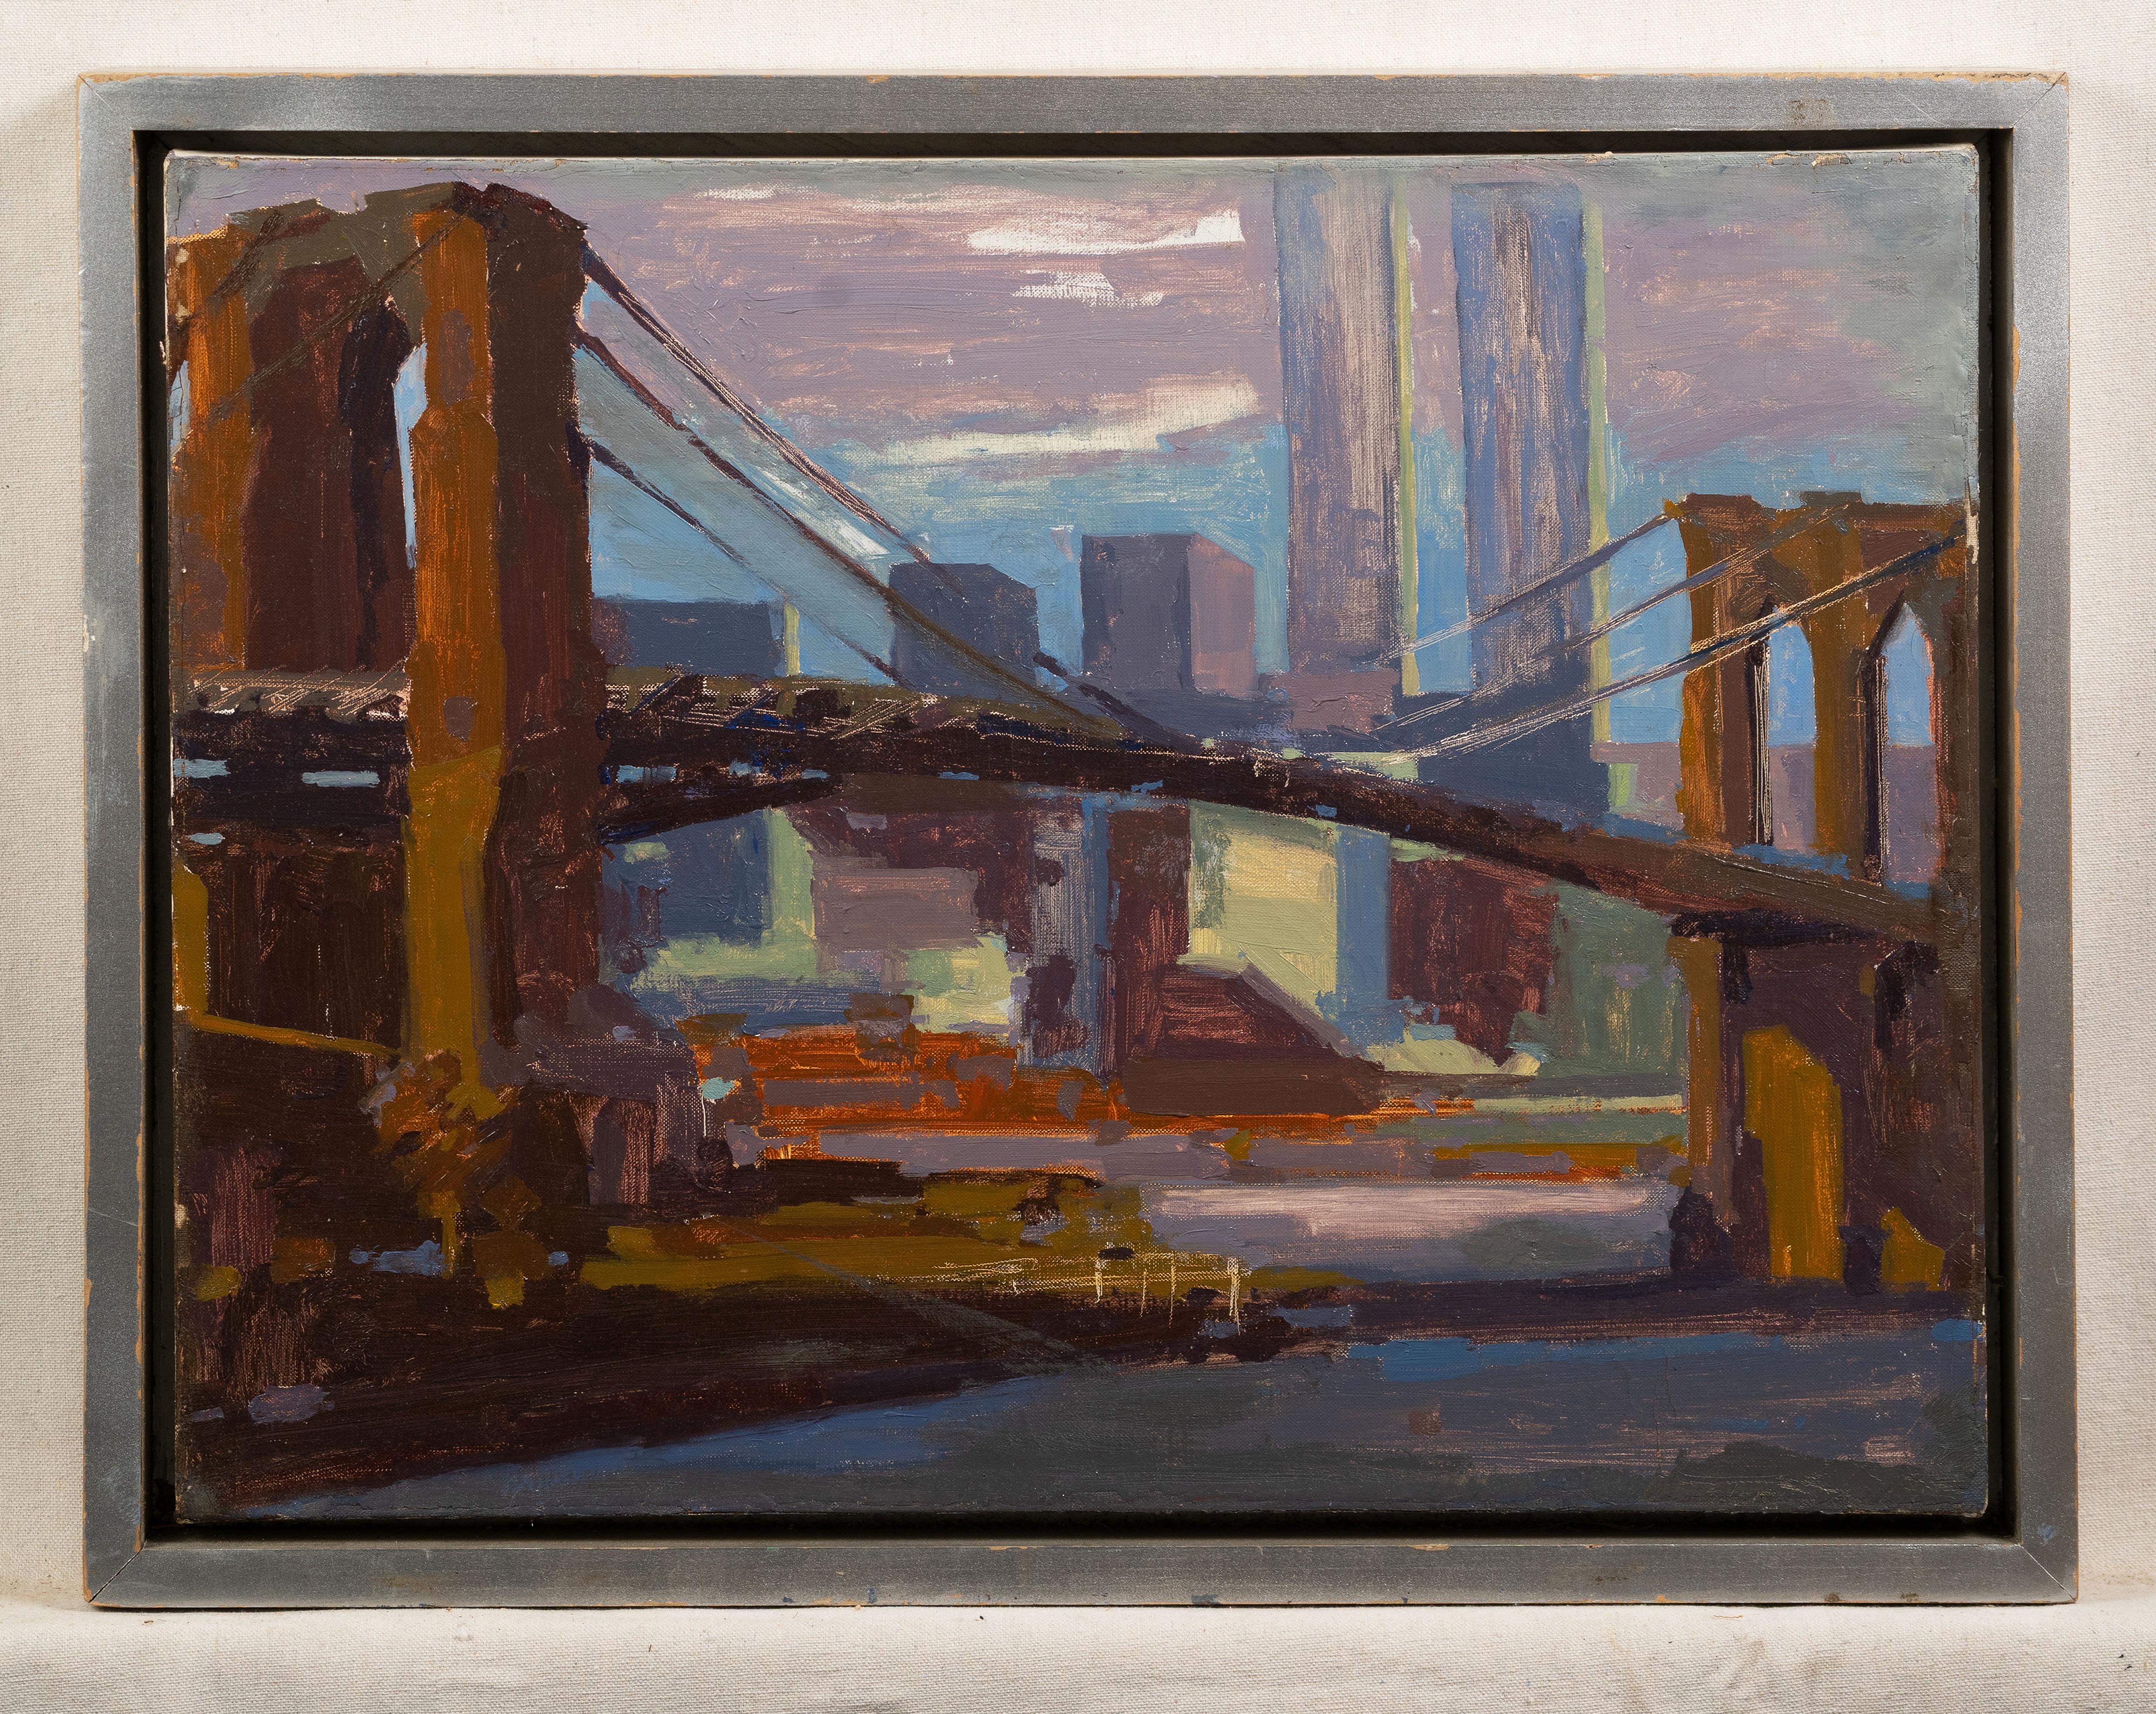 Antique American modernist cityscape oil painting.  Oil on canvas.  Framed.  Image size, 24L x 18H.